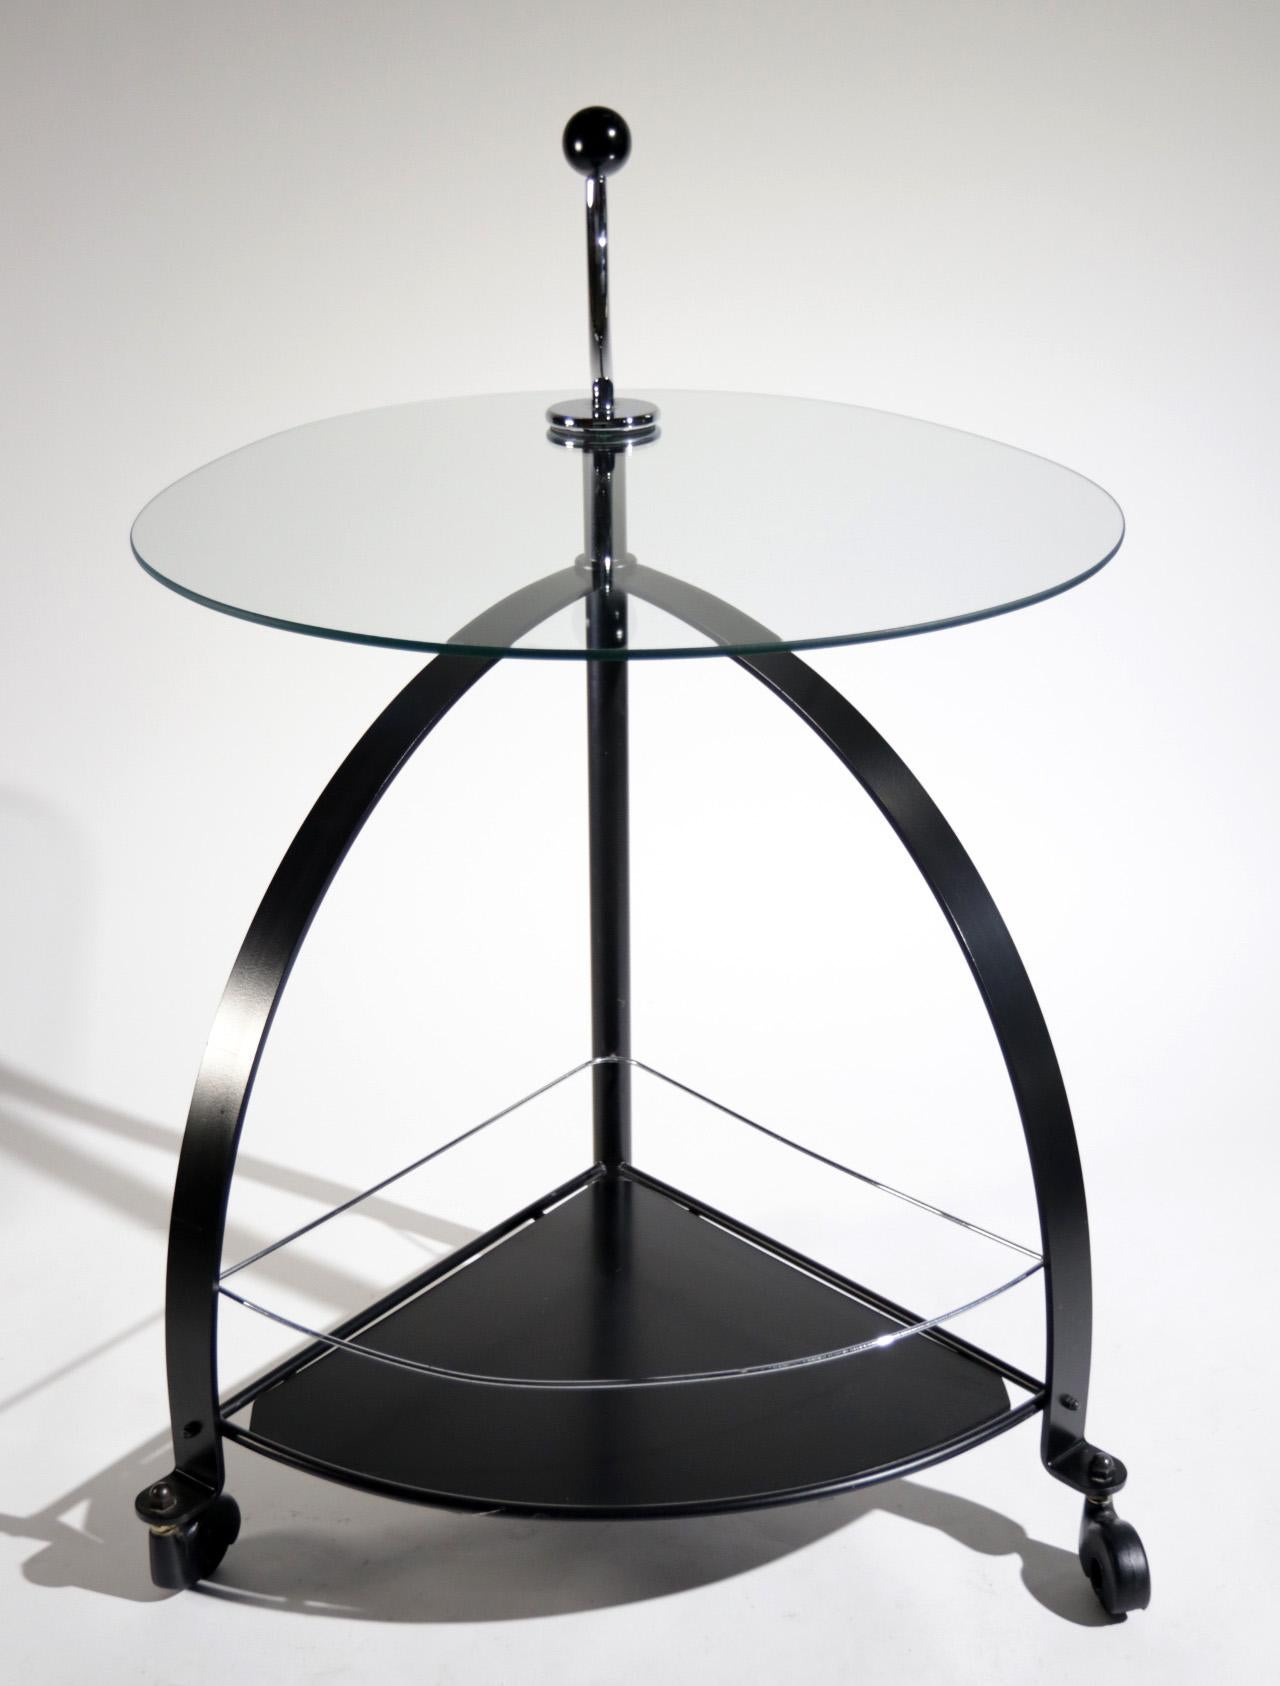 Very nicely designed serving trolley from circa 1980s.
Made of black coated flat steel, chromed steel parts and glass top.   
   